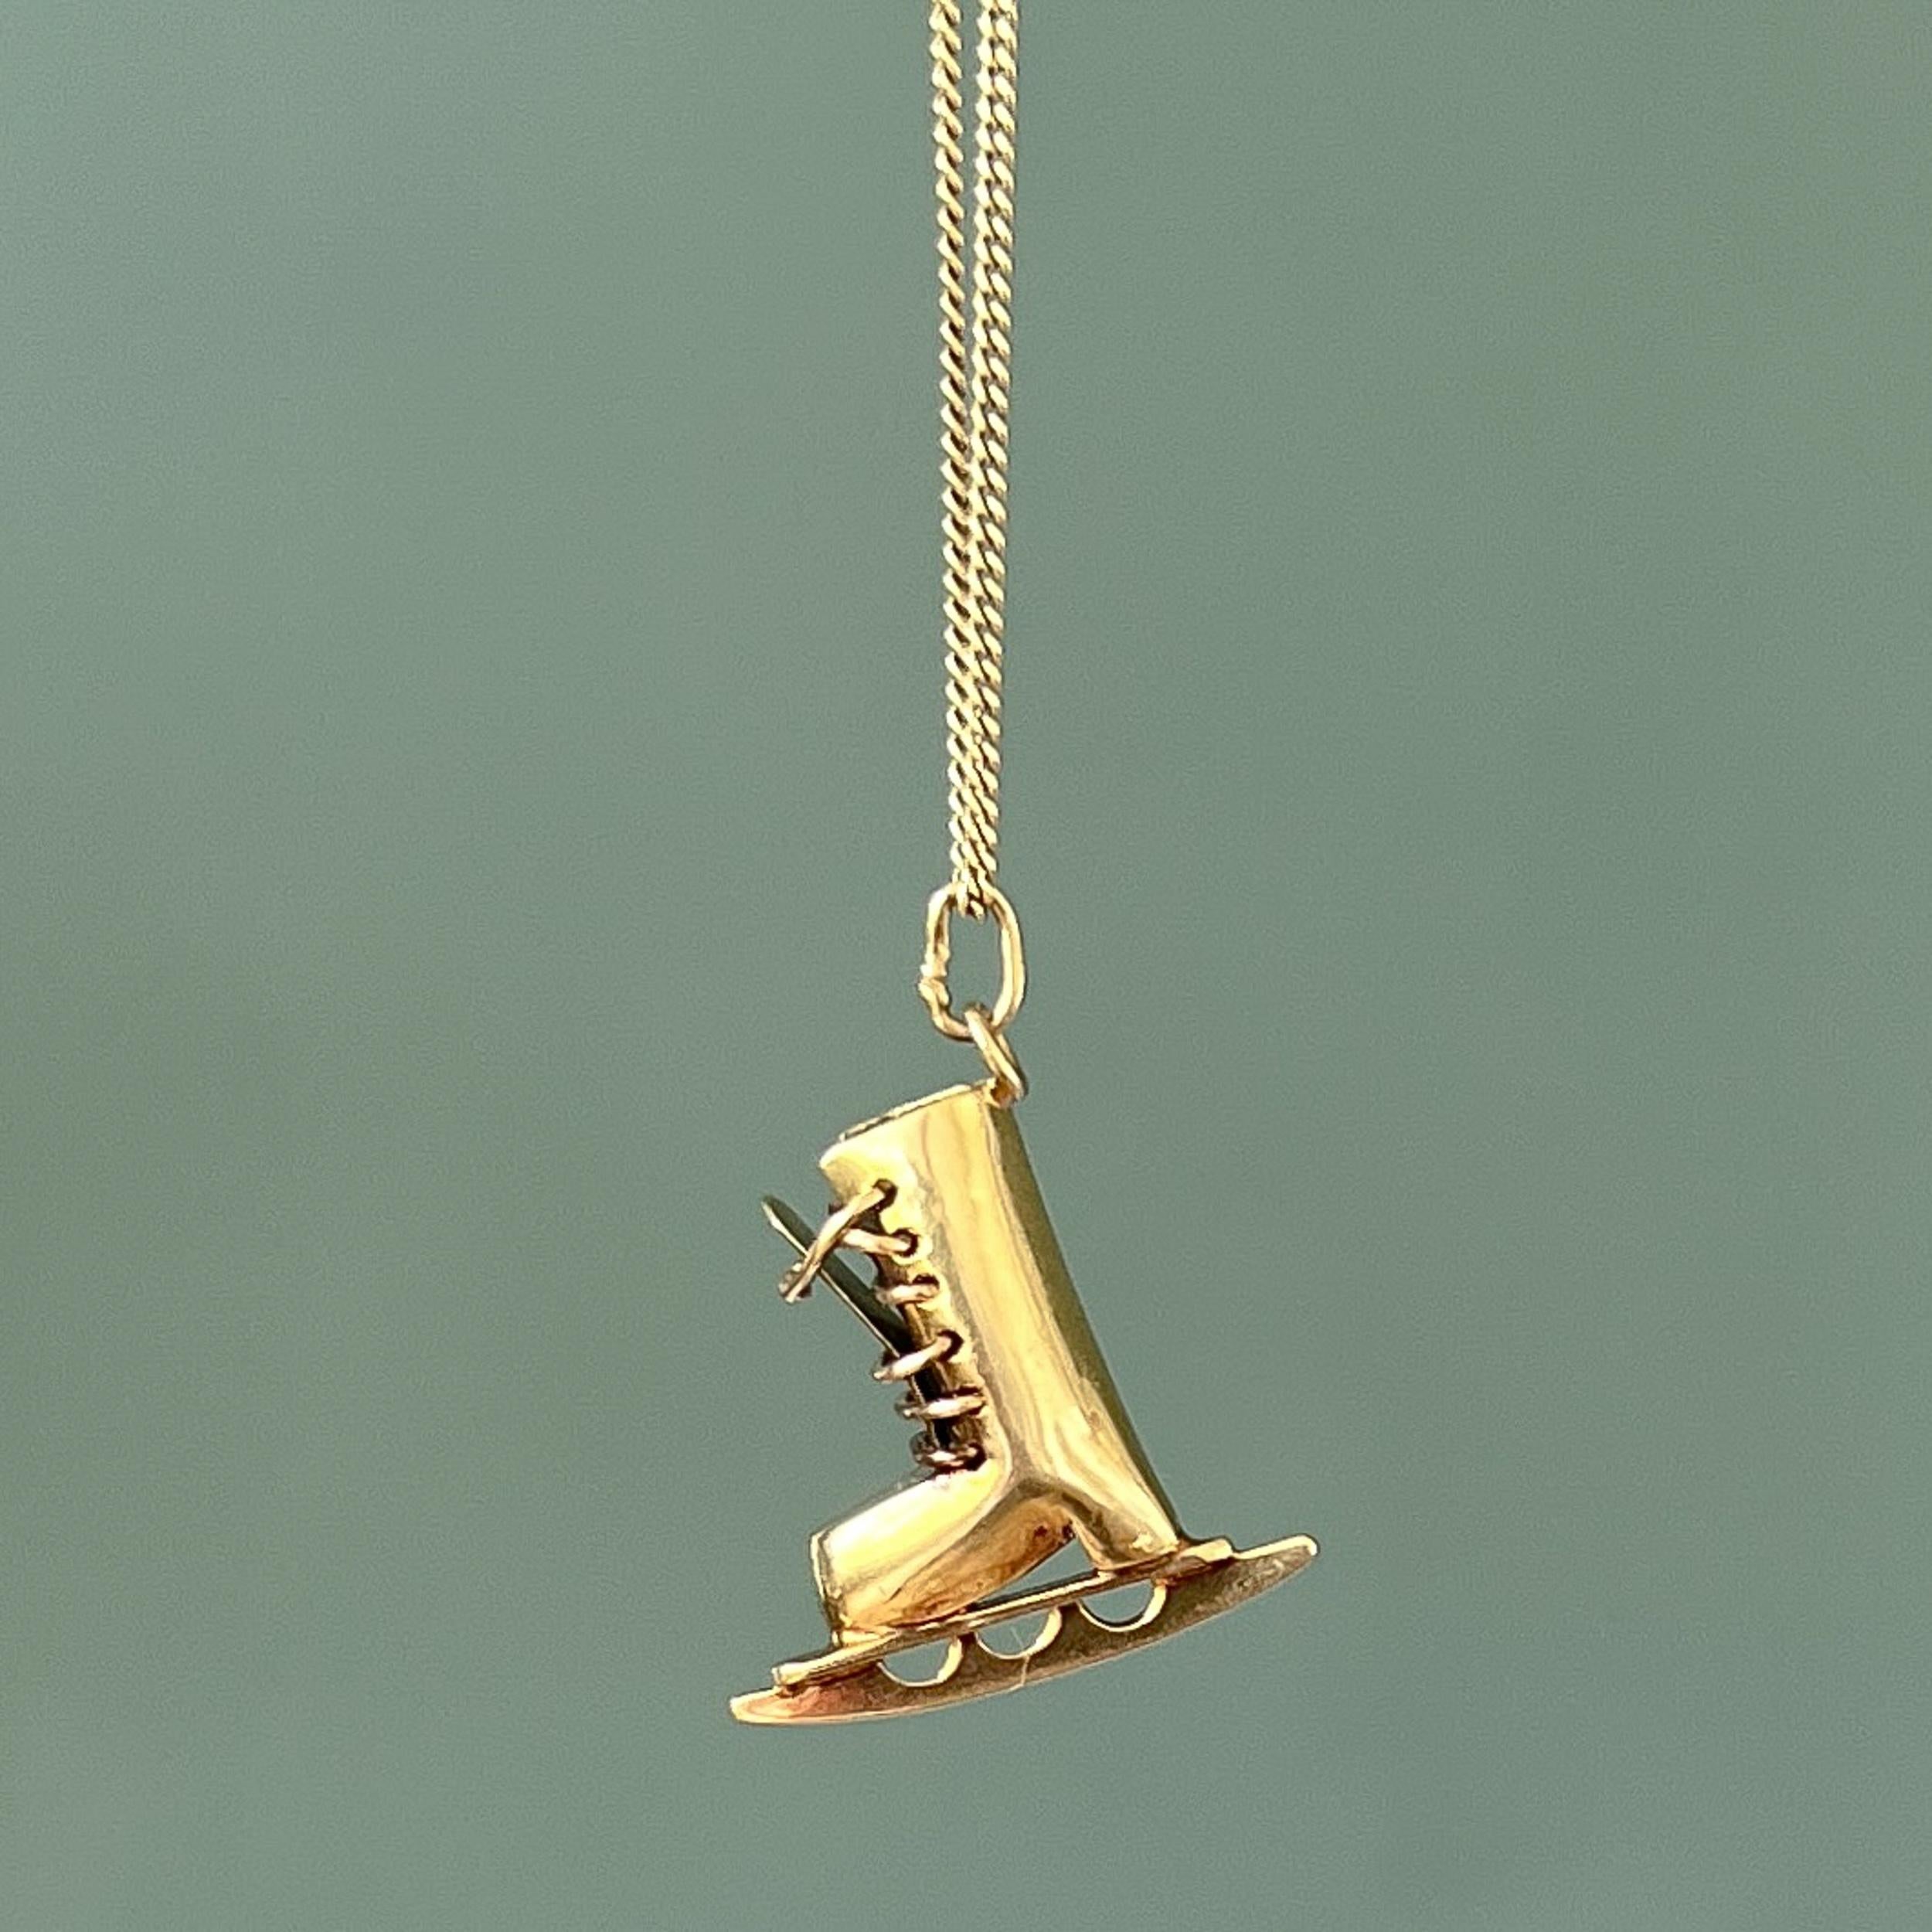 A lovely mid-century gold ice hockey skate charm pendant. This skate is beautifully detailed with shoe lip and lace. Put on your skates and get ready to play your ice hockey game! The charm is created in 14 karat yellow gold. 

Charms are great to